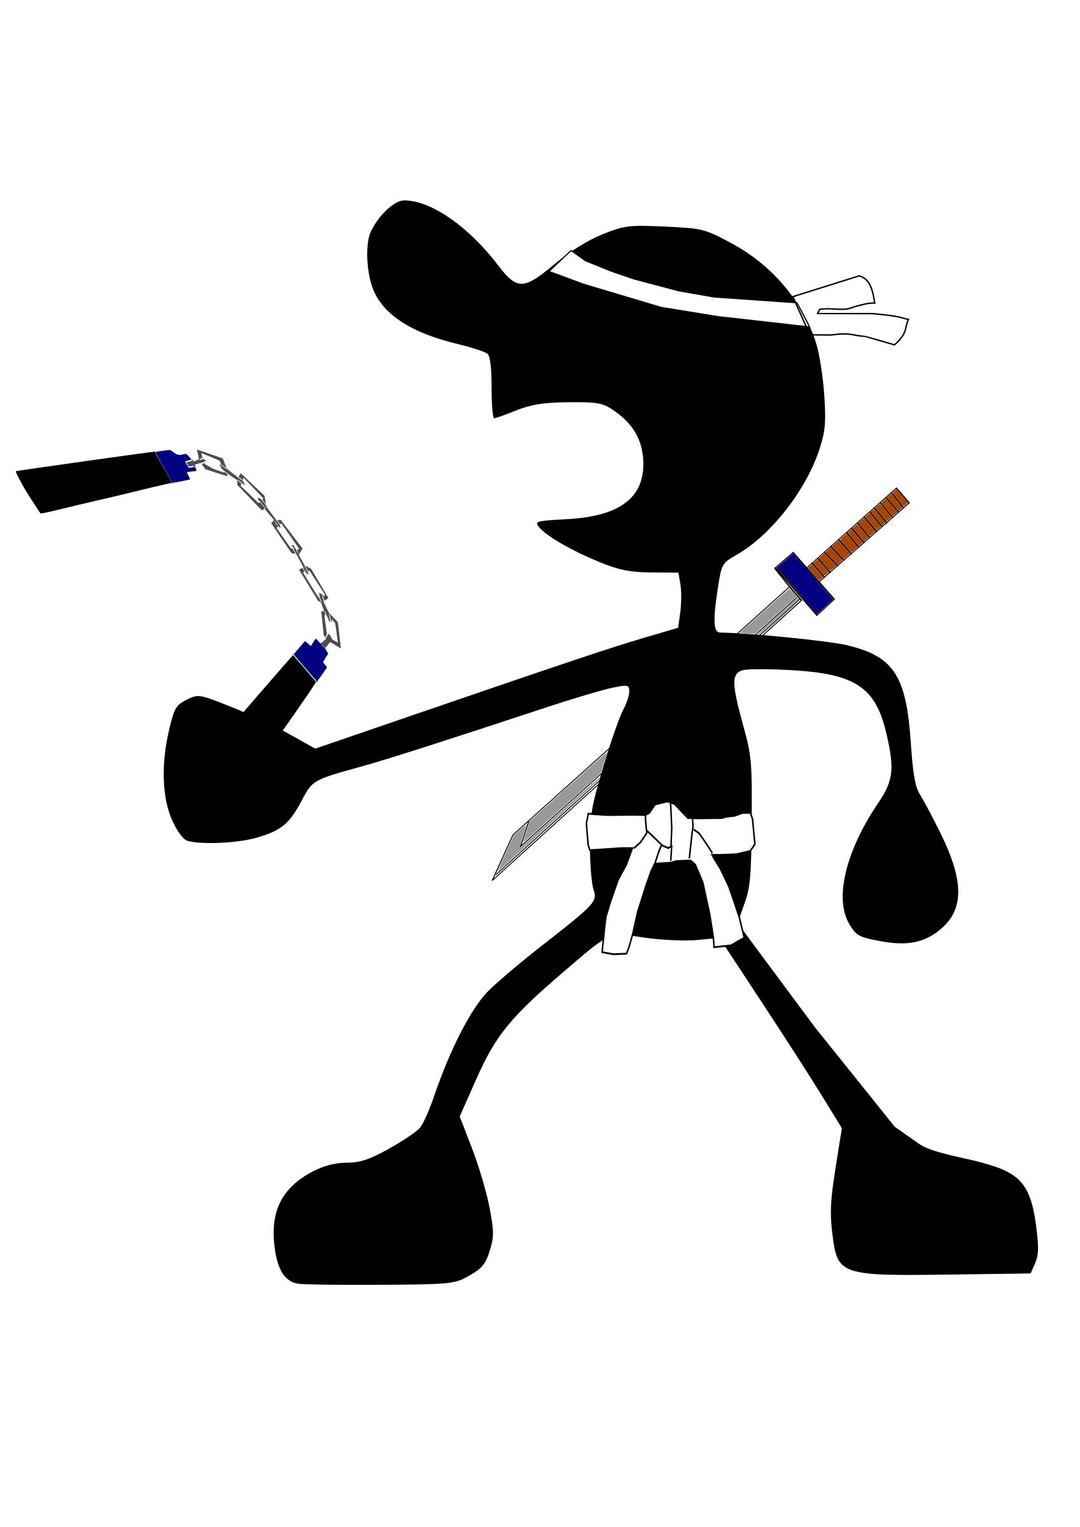 Mr. Game and watch png transparent